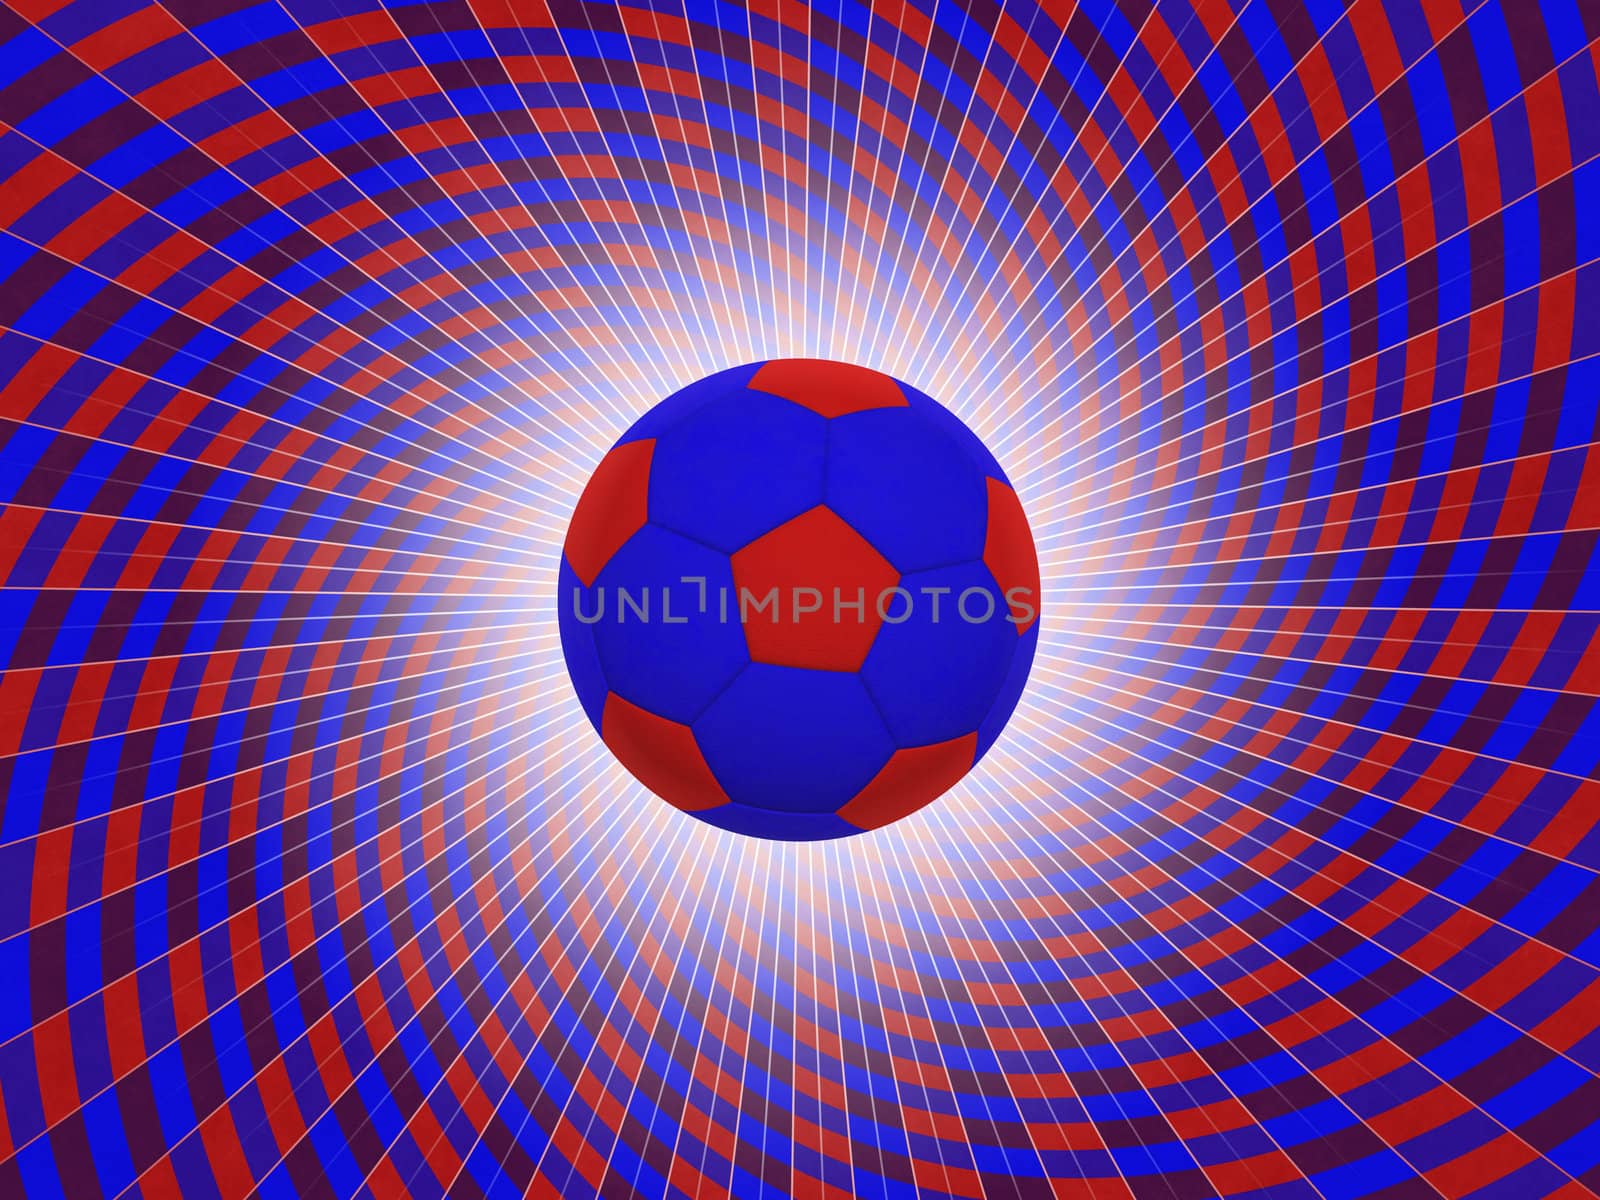 Soccer Ball With Colors of the UK Over Striped Dynamic Background - Realistic 3D Illustration